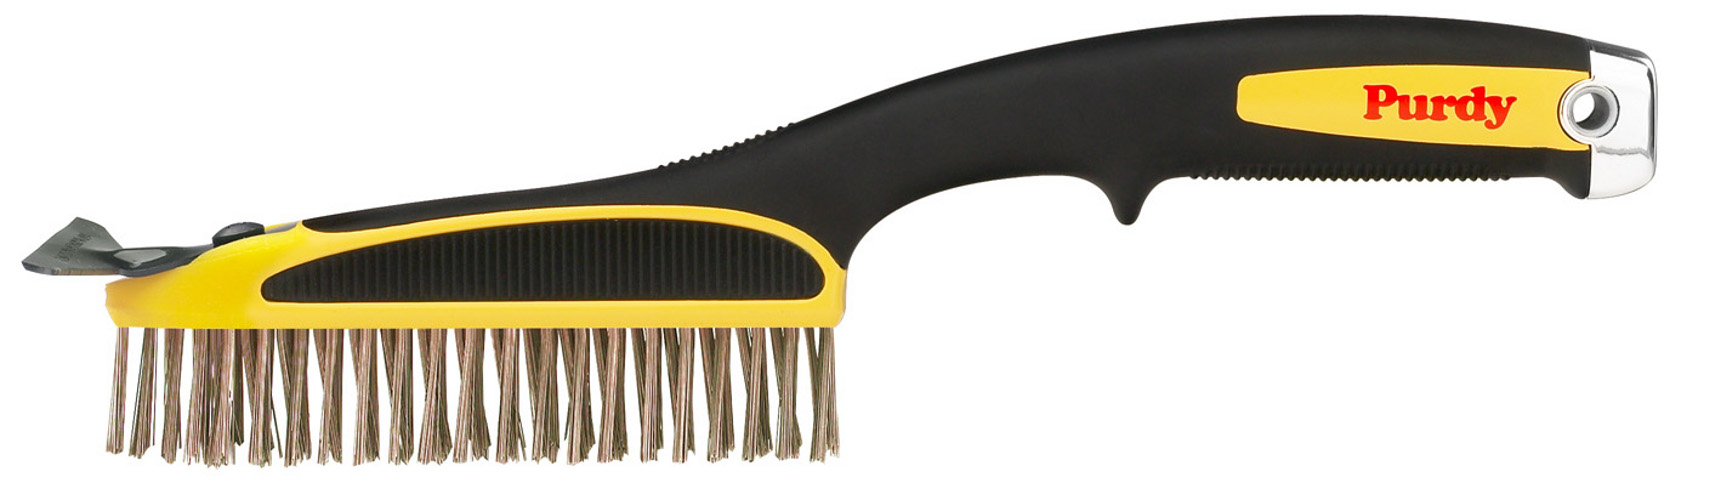 Purdy Long Handle Wire Brush